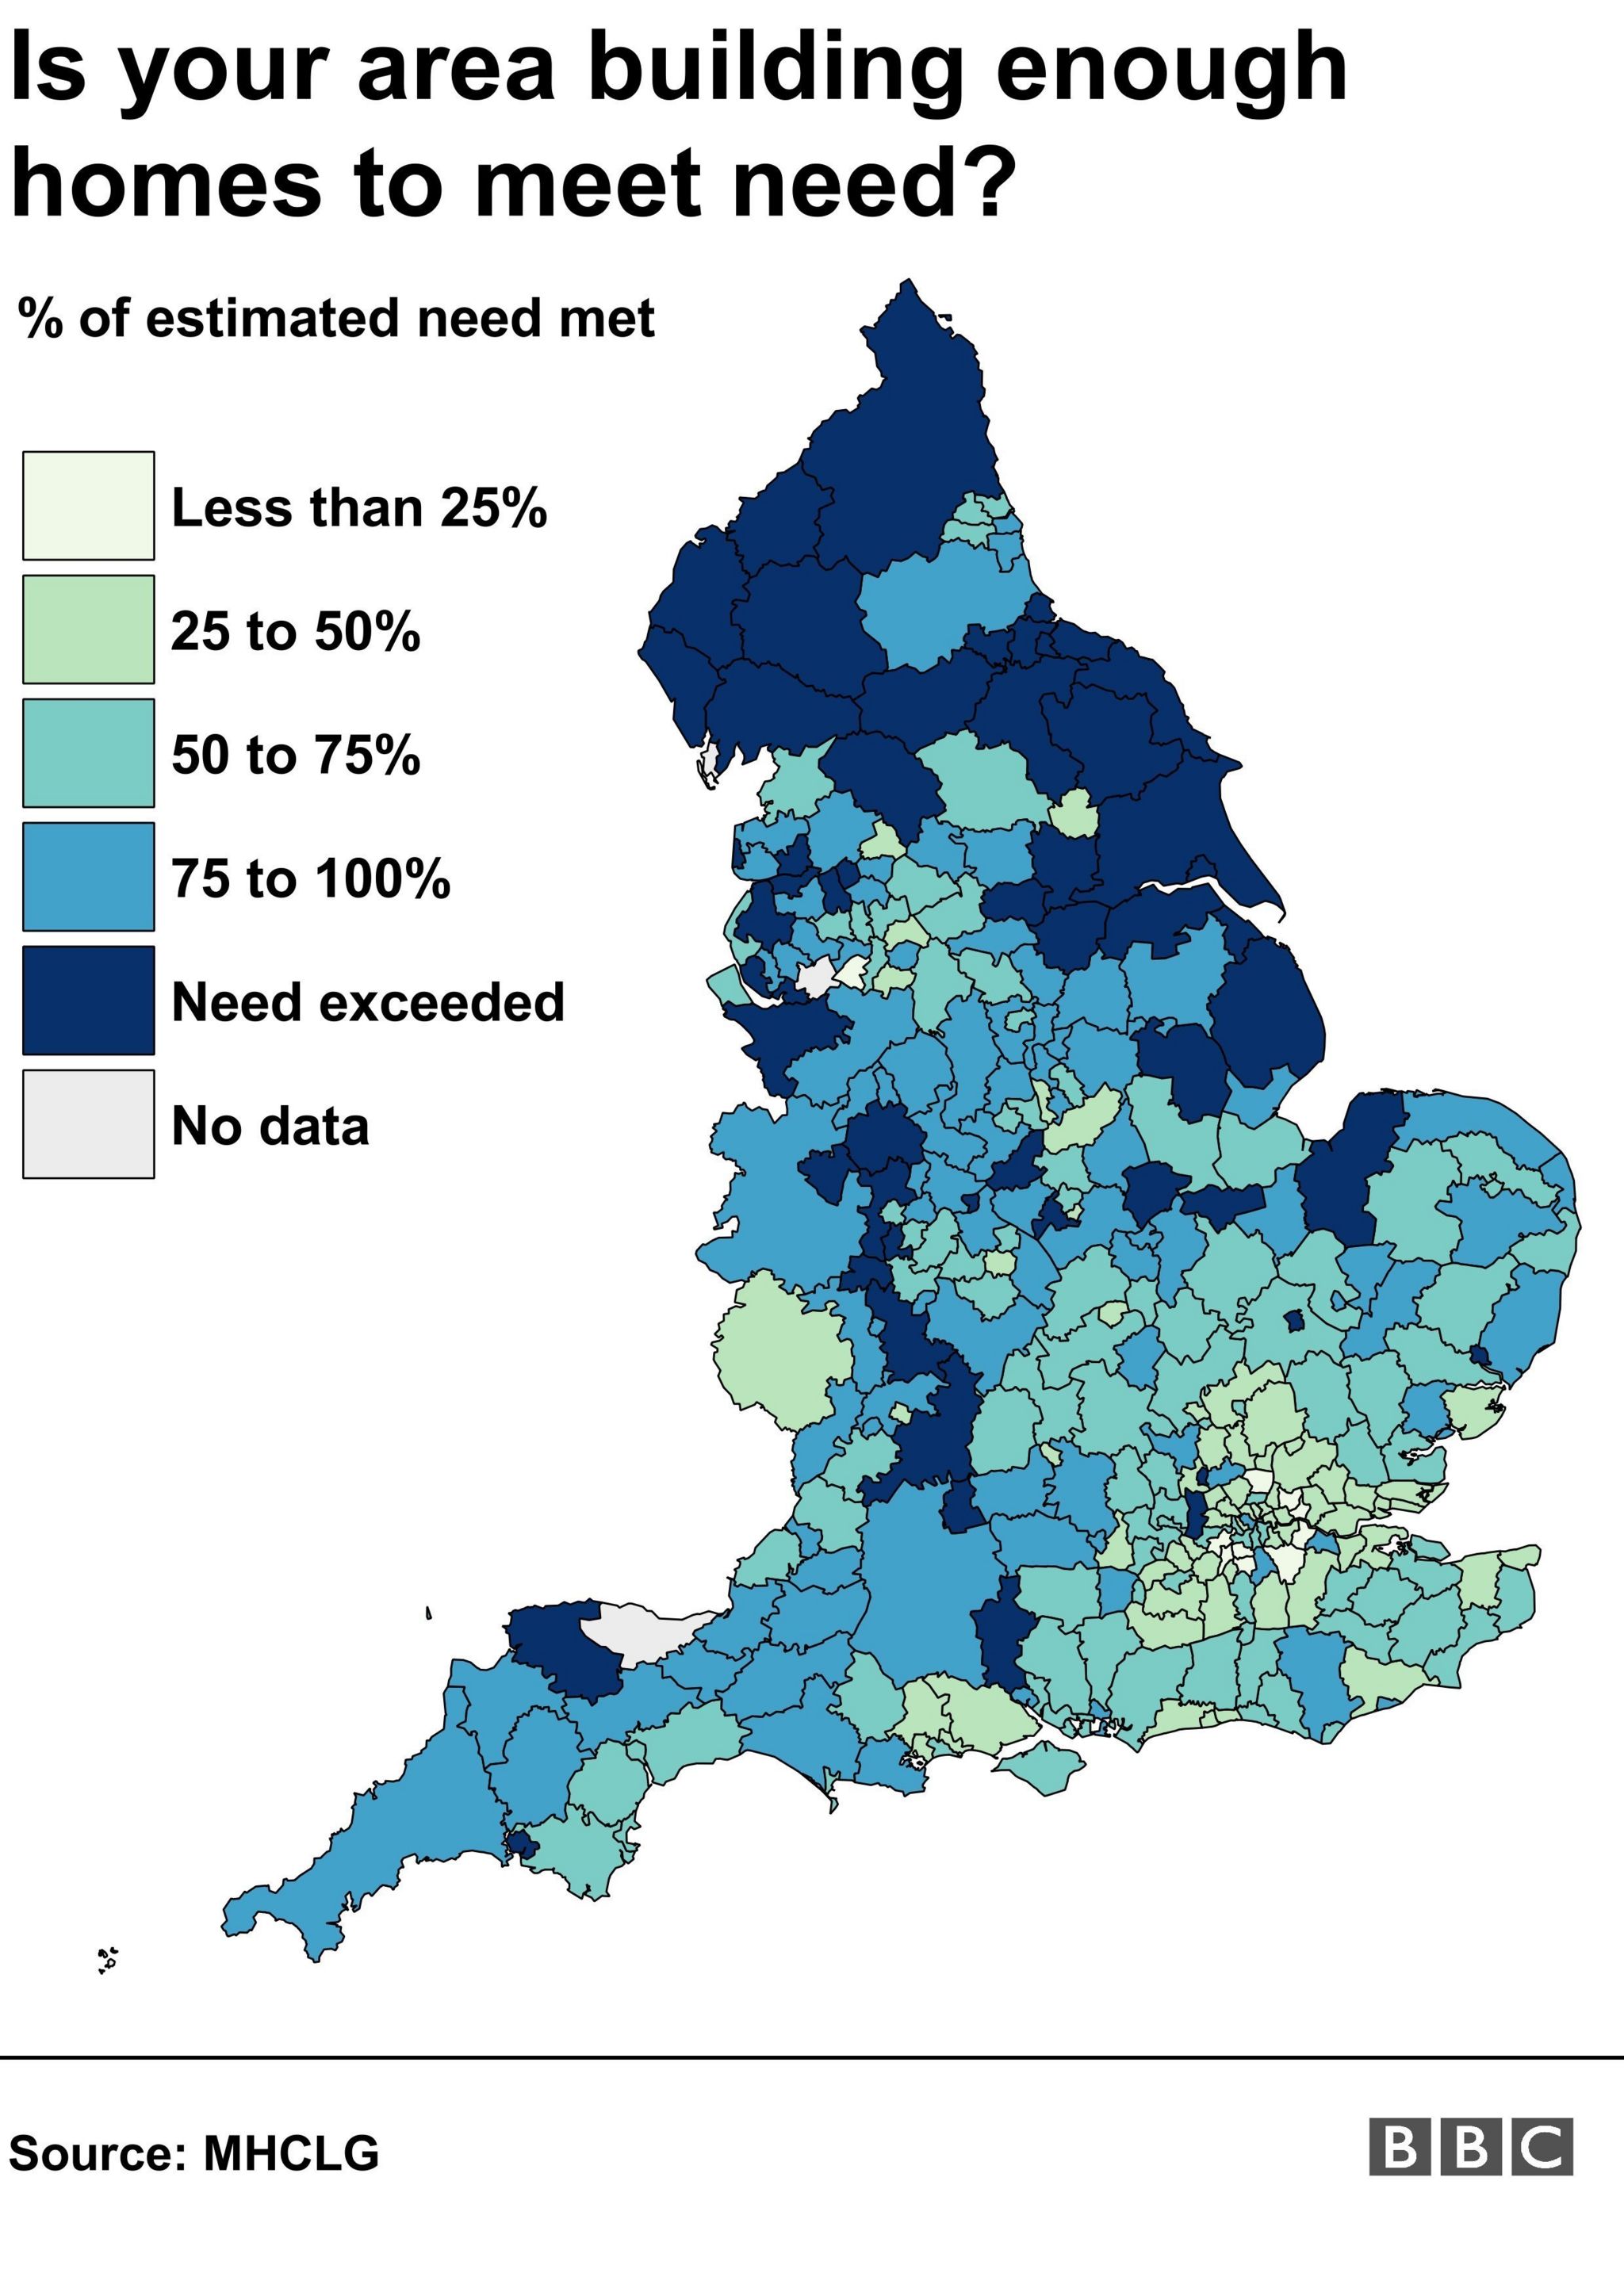 Map showing which areas of the UK are meeting the demand for housing